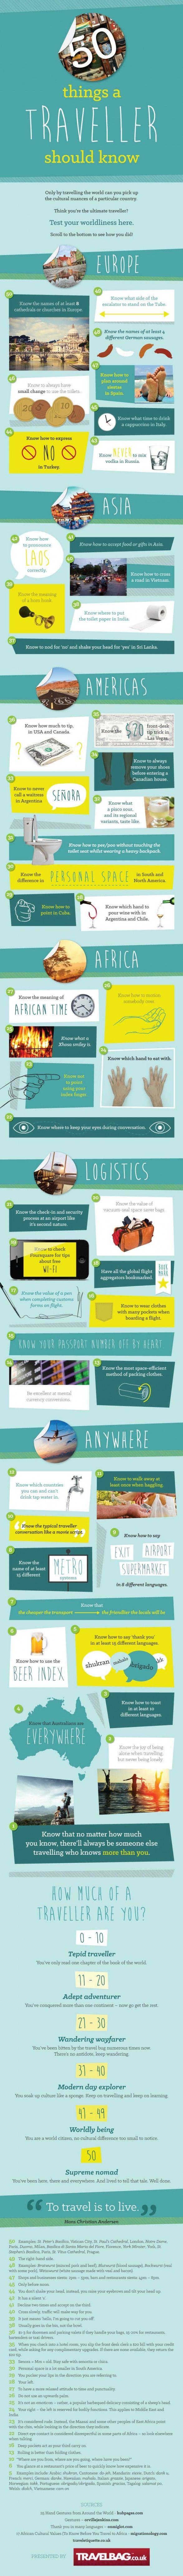 Свадьба - 50 Things A Traveler Should Know Infographic